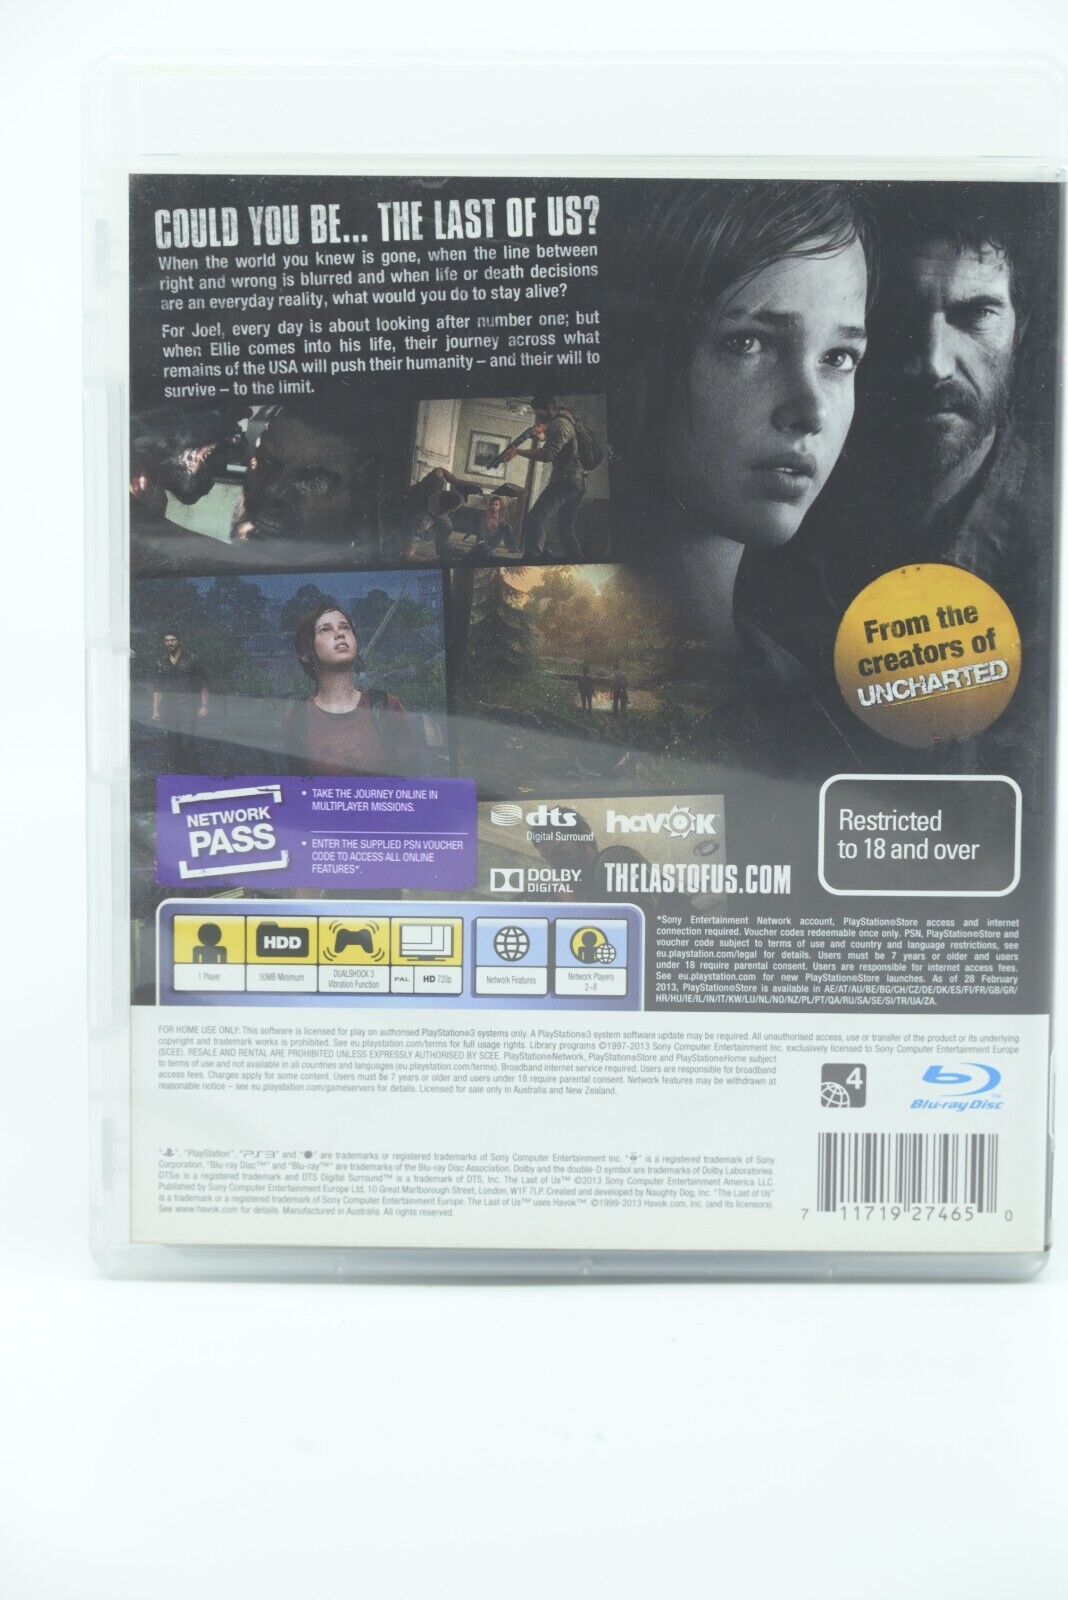 The Last of Us - Sony Playstation 3 / PS3 Game - FREE POST!